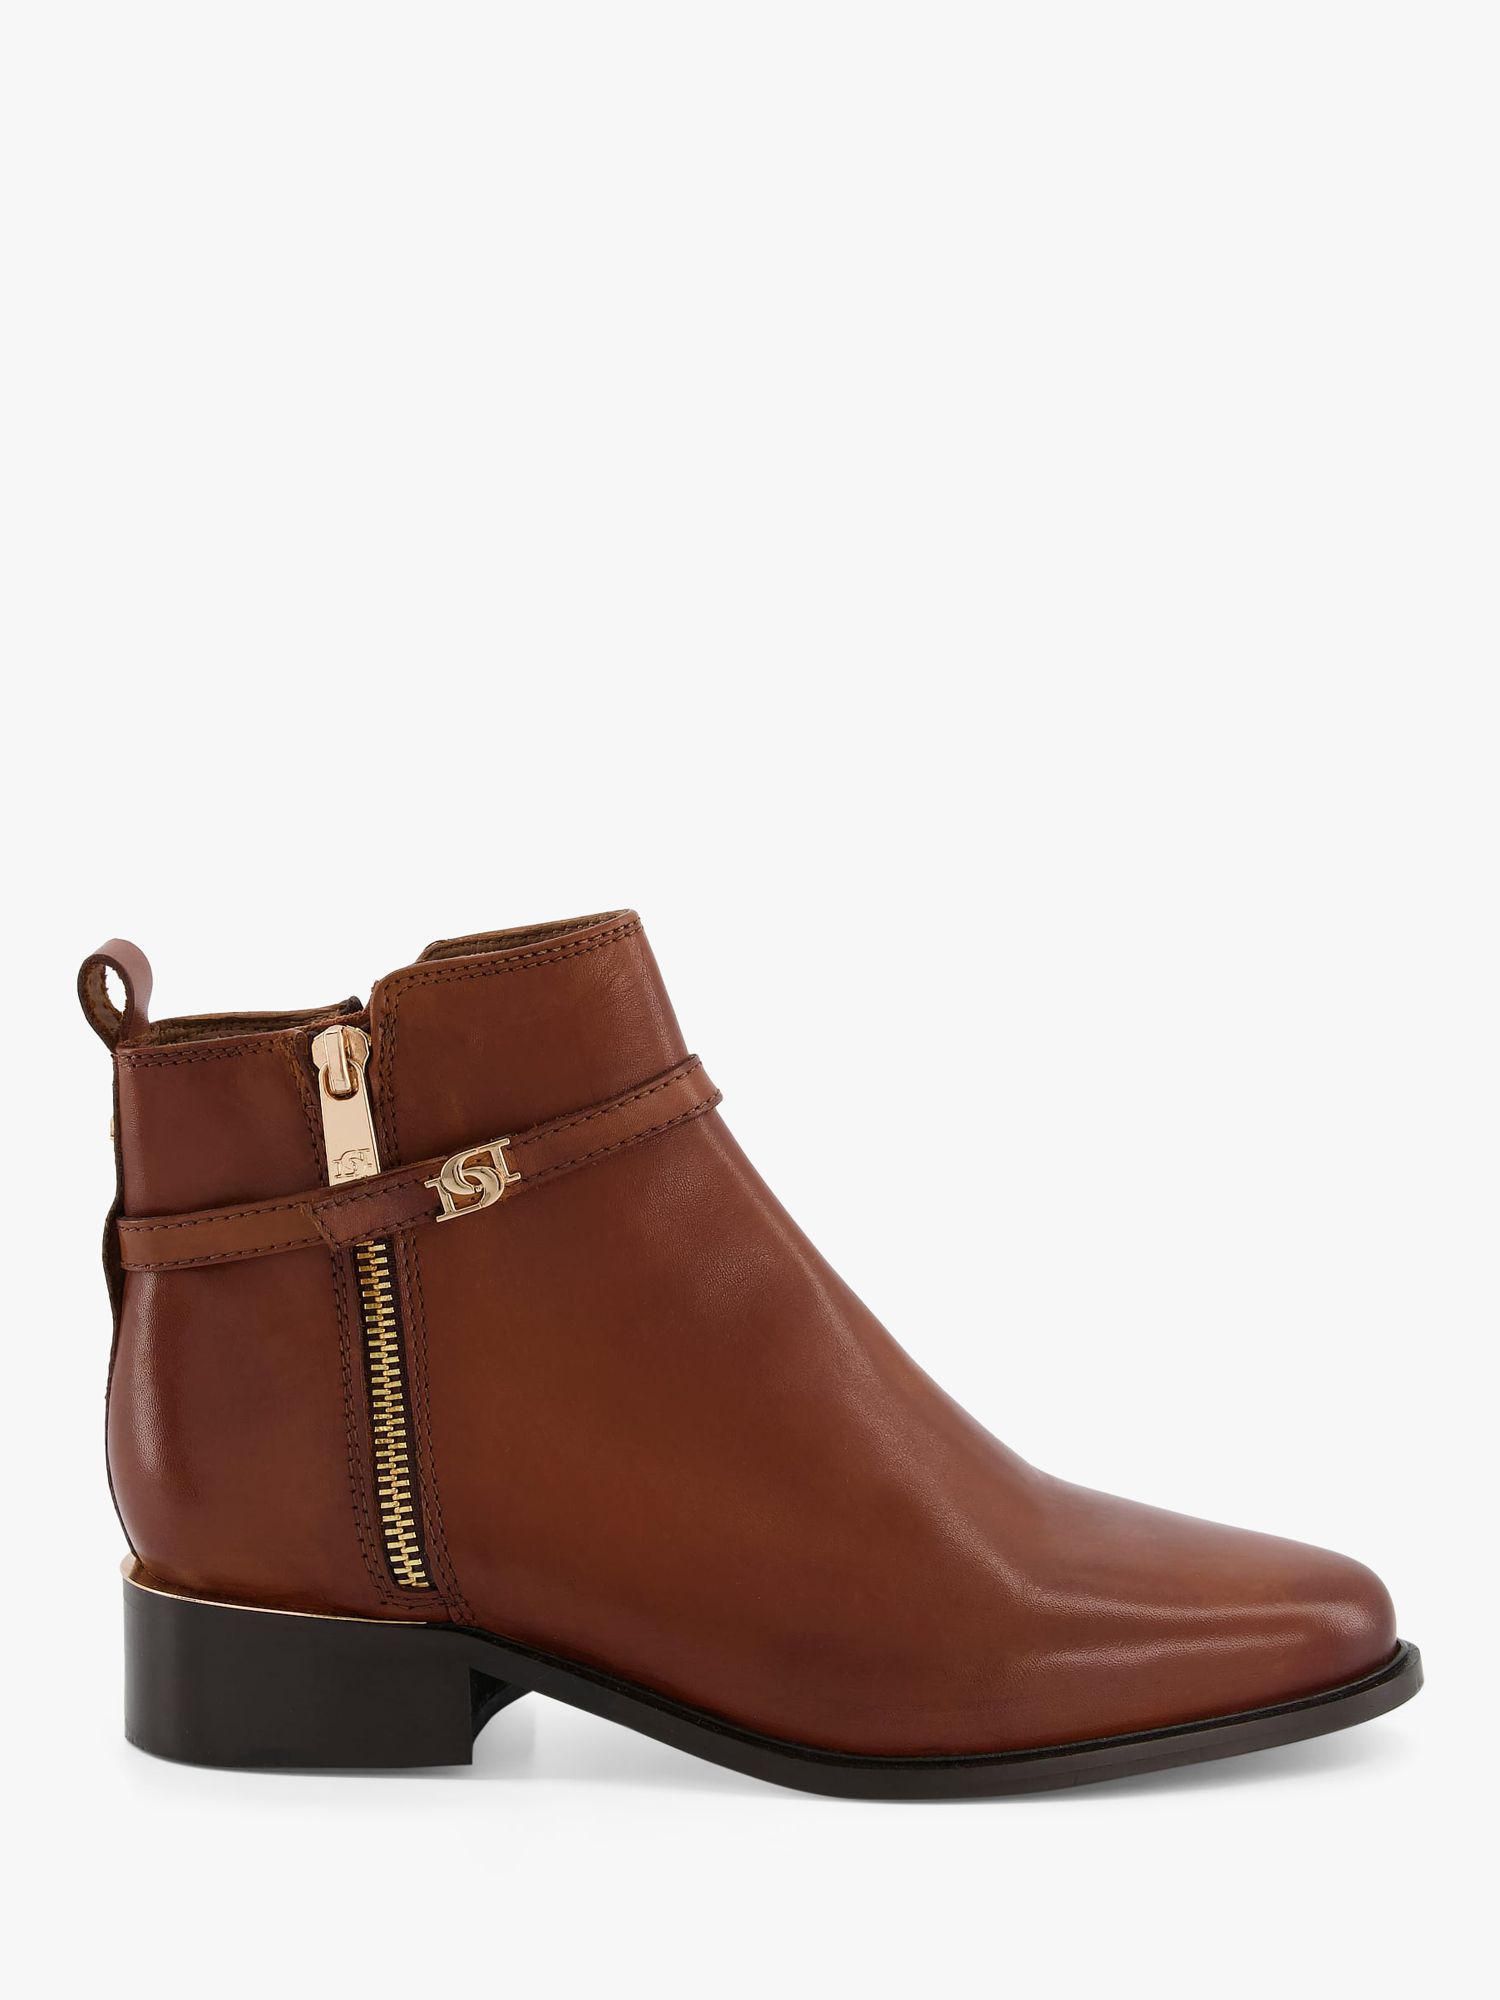 Dune Pap Leather Side Zip Ankle Boots, Tan-leather at John Lewis & Partners